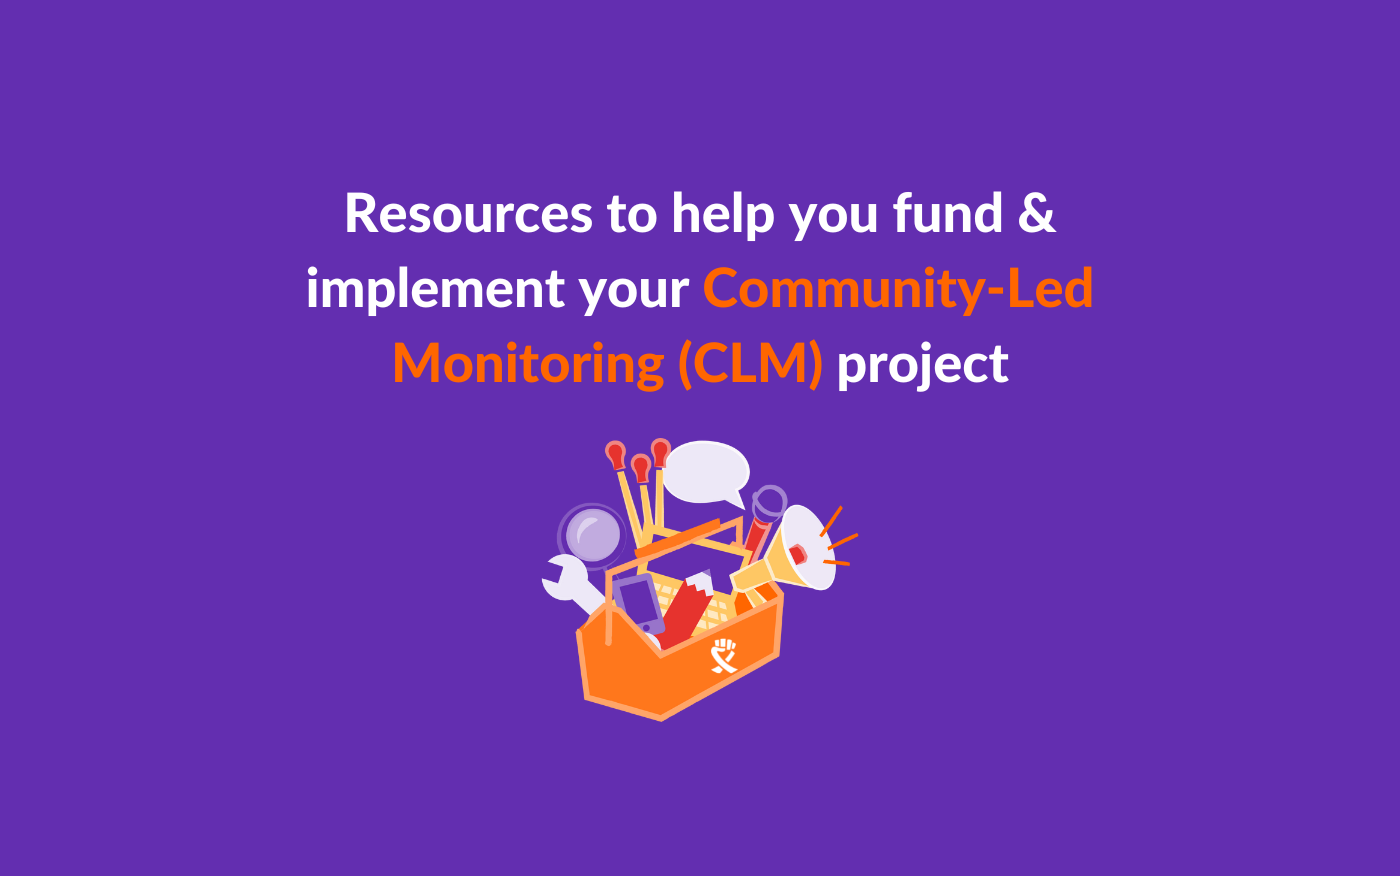 Resources to help you fund & implement your Community-Led Monitoring (CLM) project